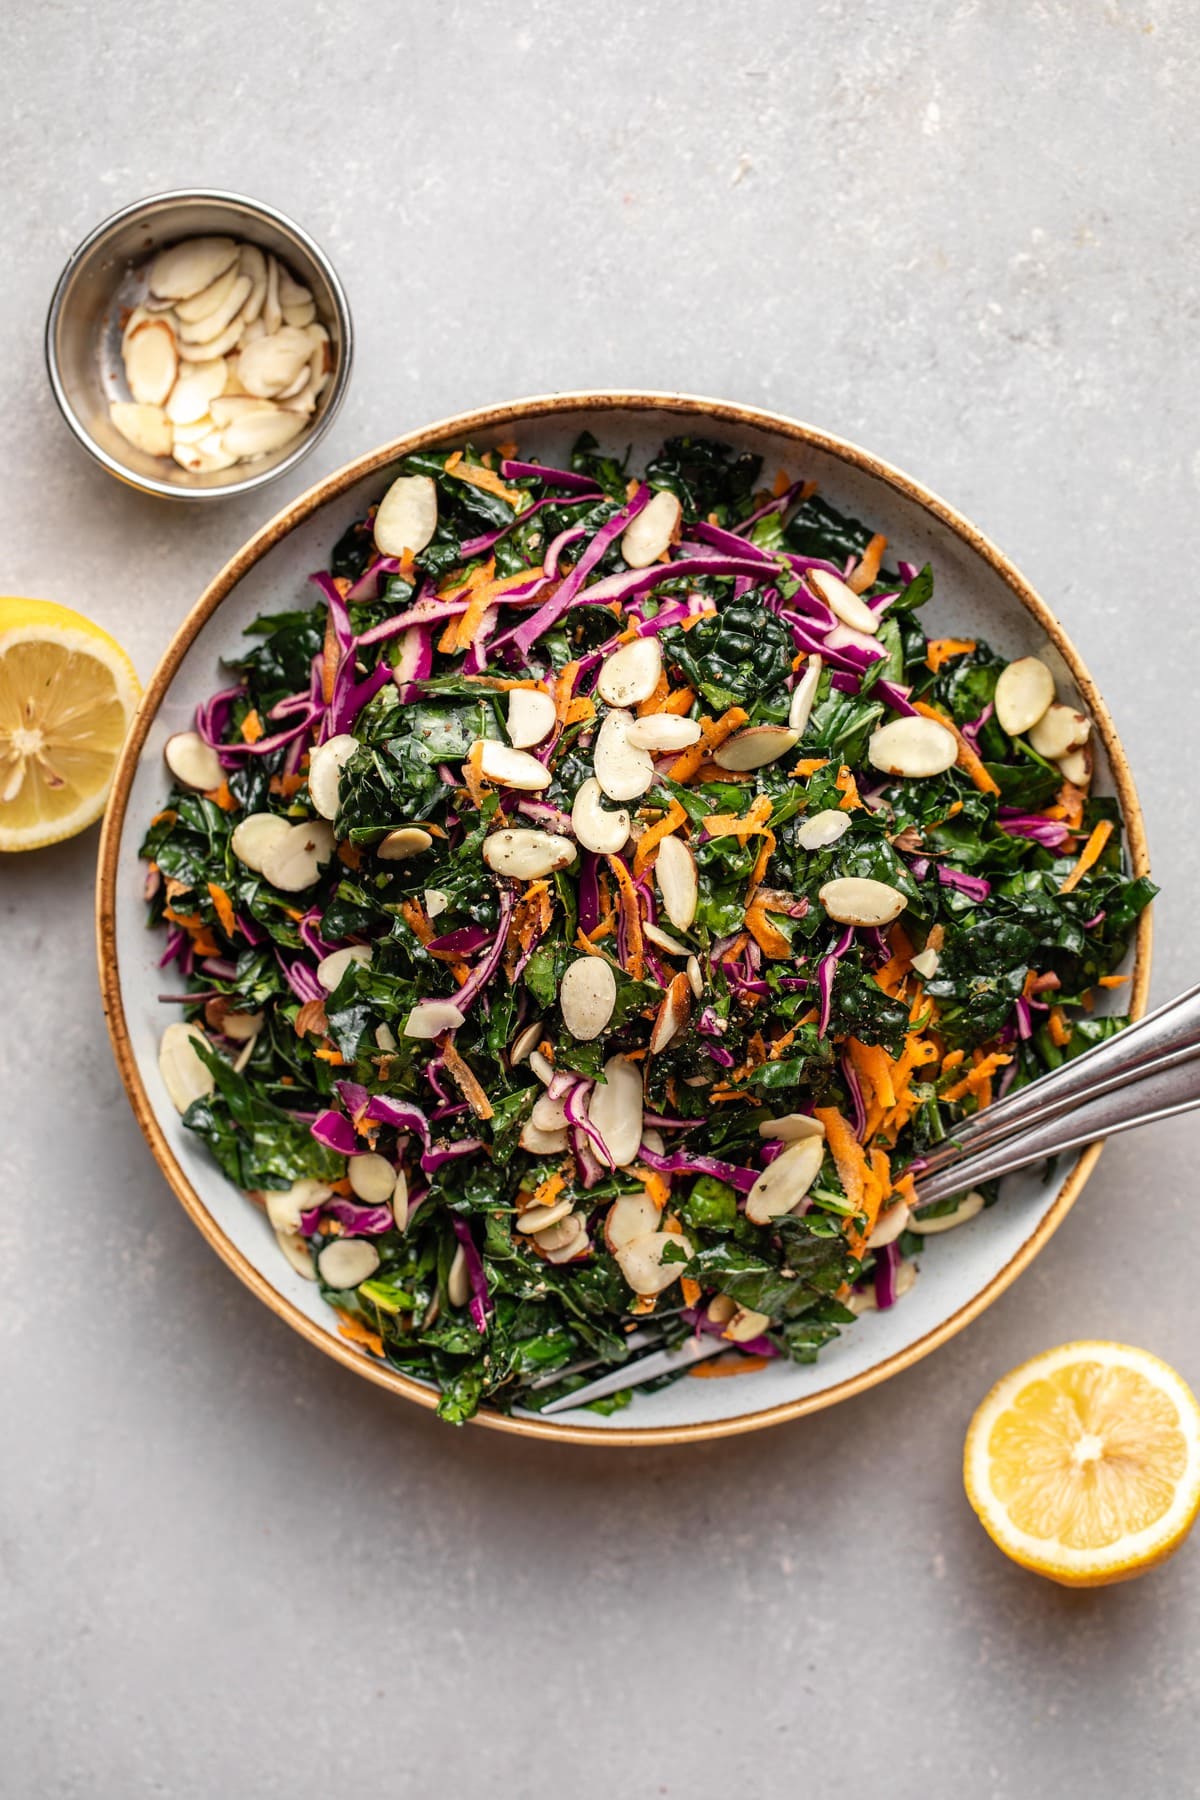 kale salad in large white bowl with lemon wedges and slivered almonds on the side